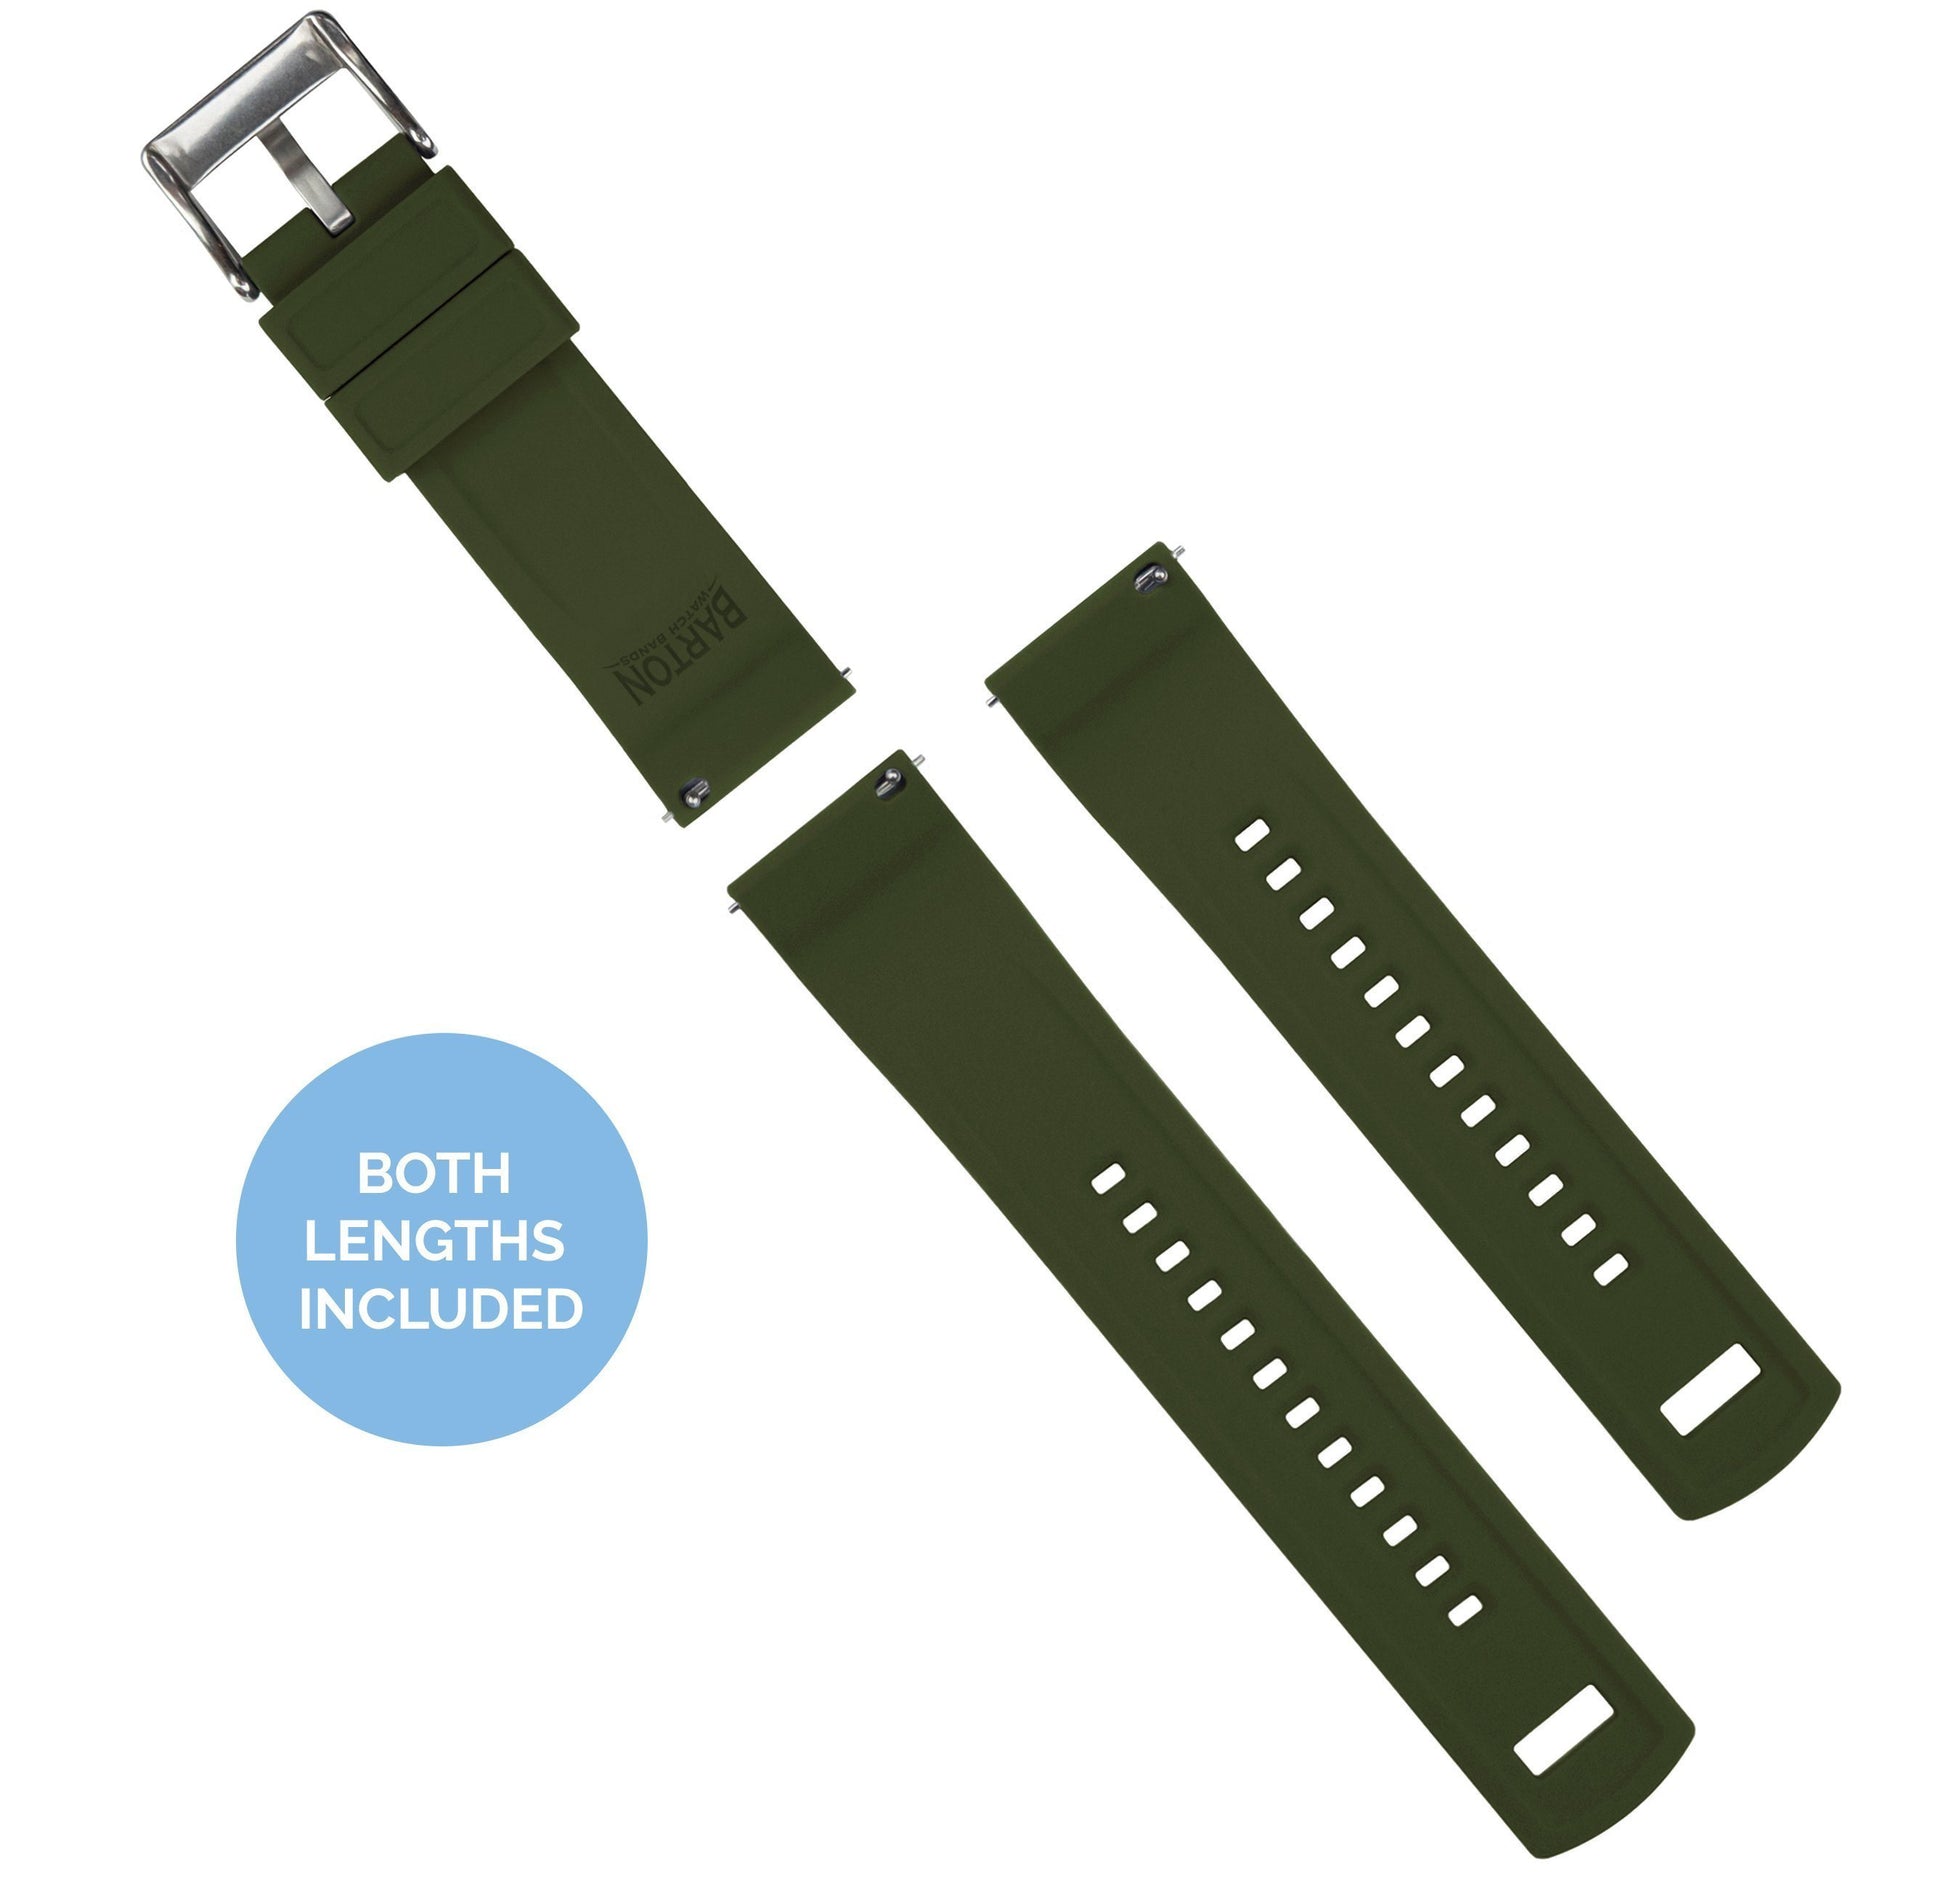 Withings Nokia Activité and Steel HR | Elite Silicone | Black Top / Army Green Bottom - Barton Watch Bands